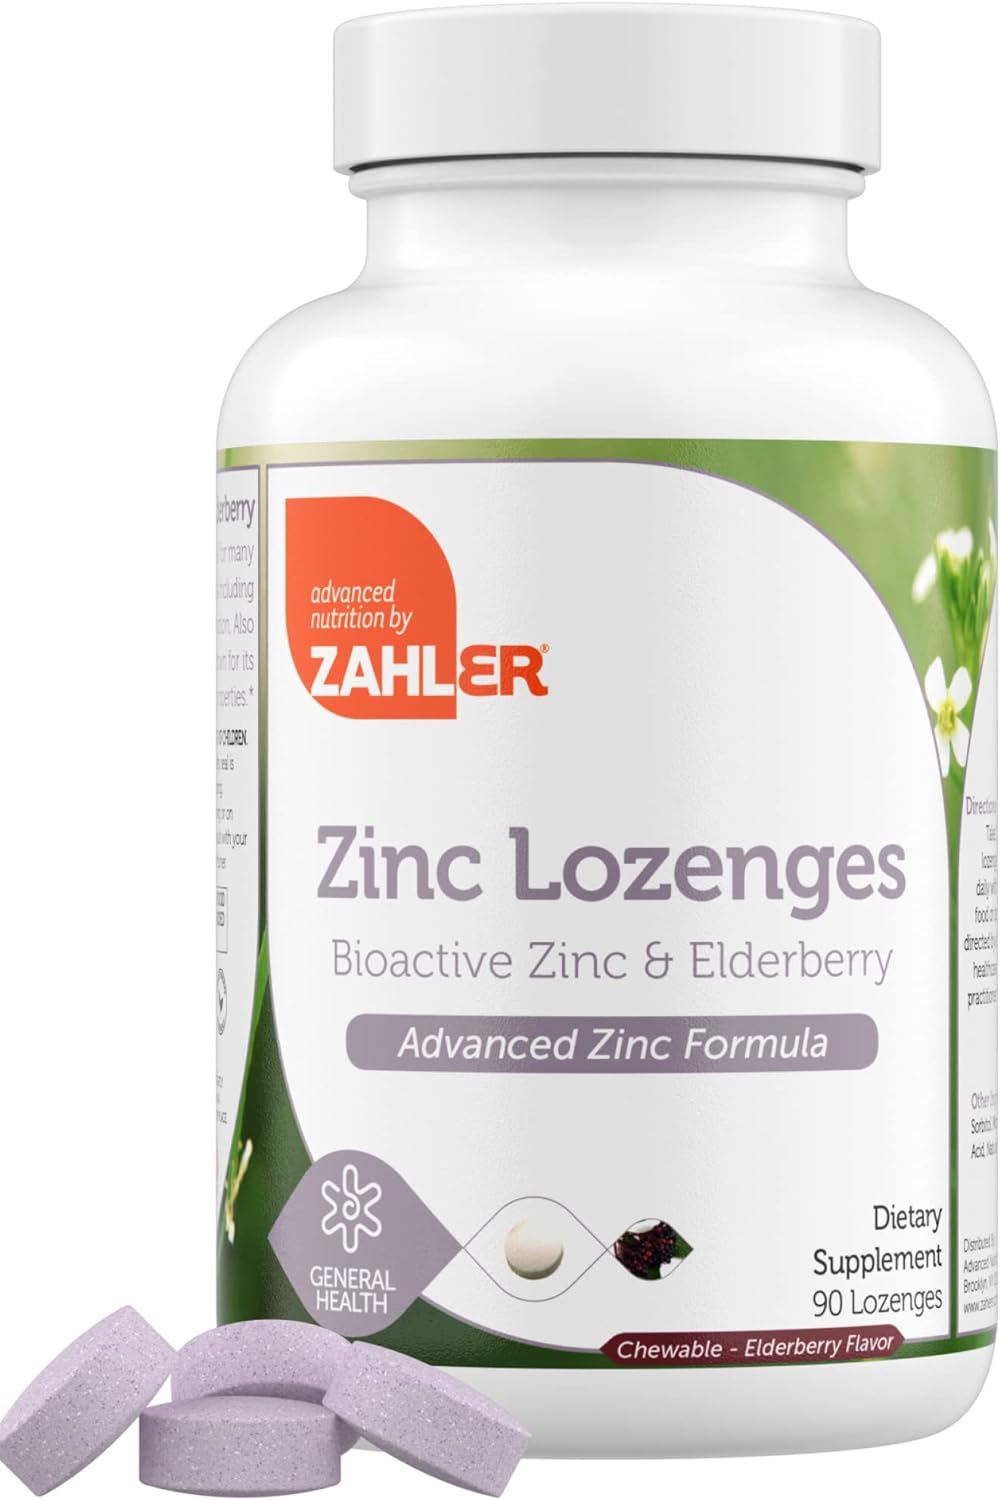 90-Count Zahler 25mg Chewable Zinc Lozenges w/ Elderberry $5.25 w/ S&S + Free Shipping w/ Prime or on $35+